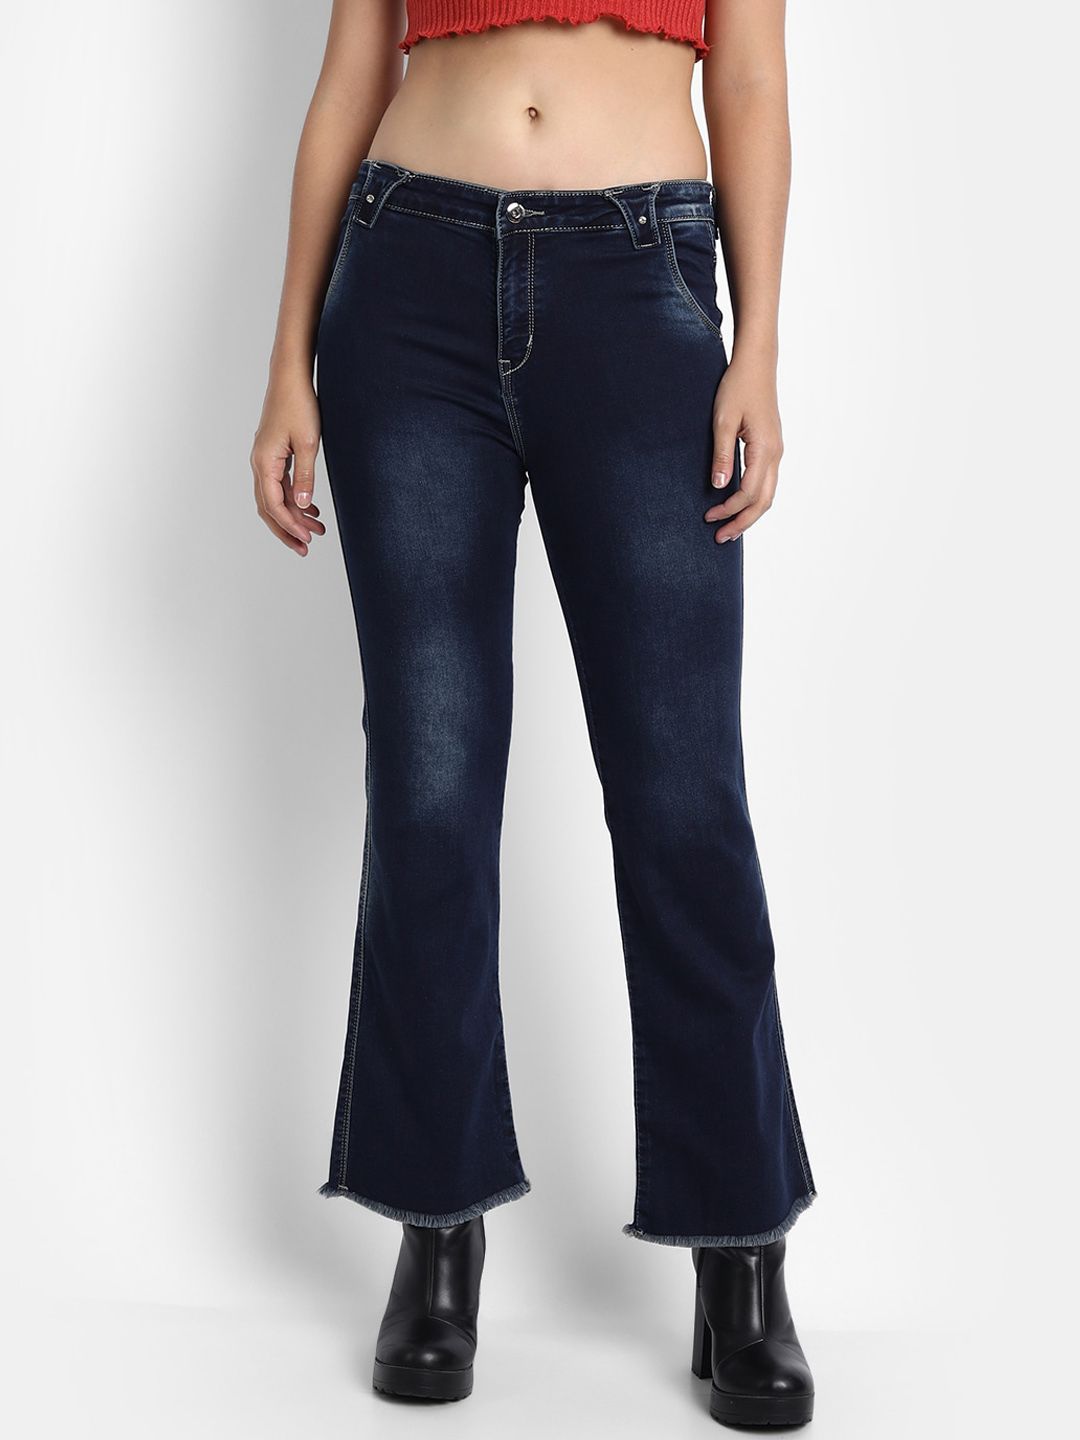 Next One Women Navy Blue Jean Bootcut High-Rise Light Fade Stretchable Jeans Price in India